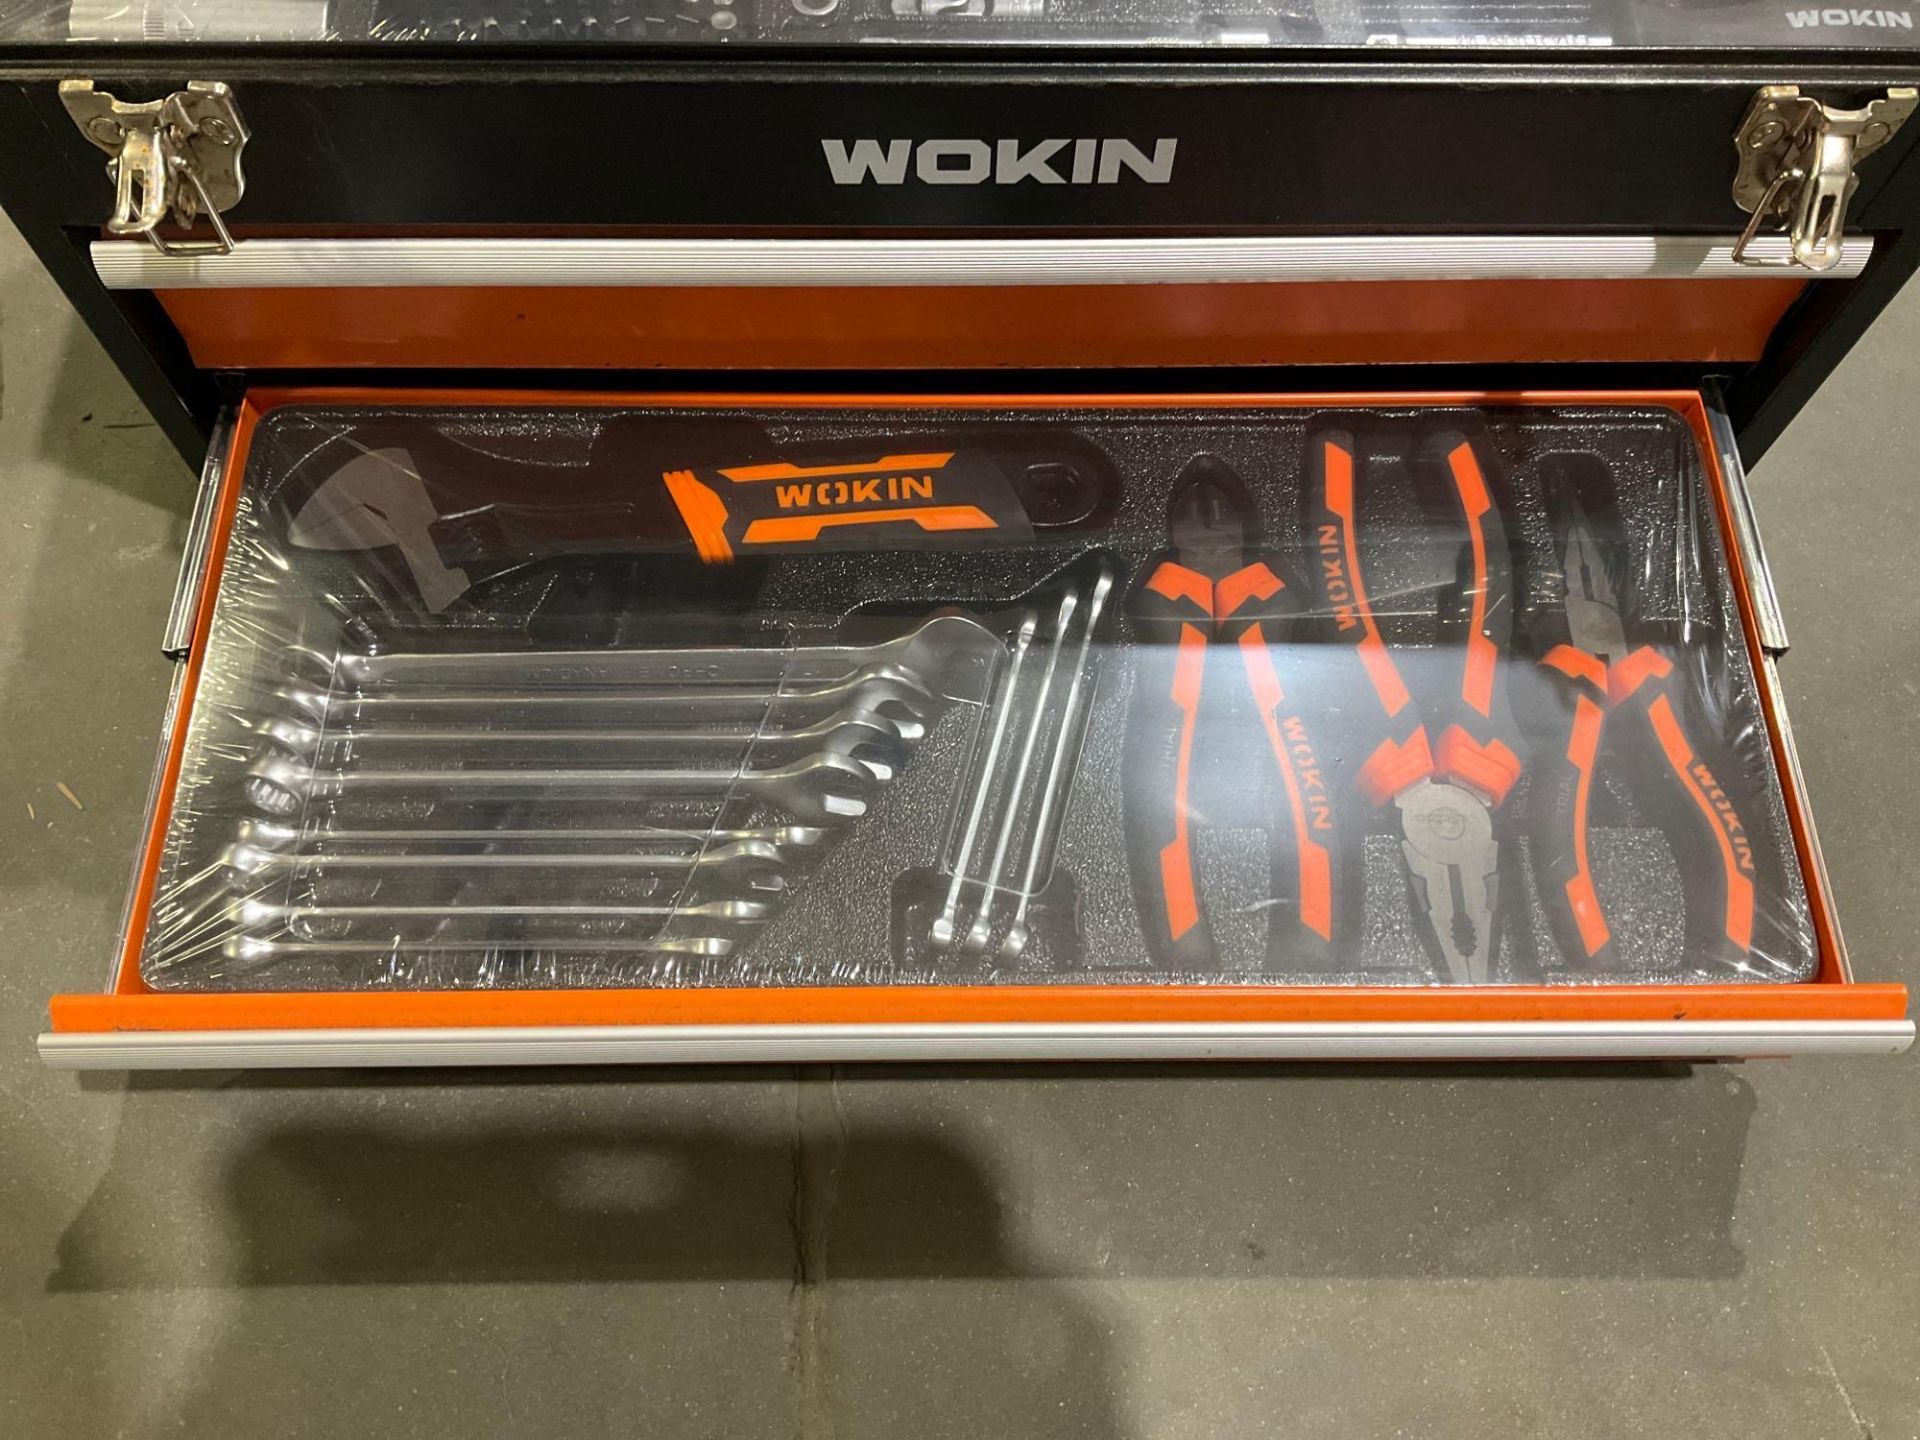 UNUSED WOKIN 98 pc TOOL BOX WITH TOOLS INCLUDED - Image 8 of 8